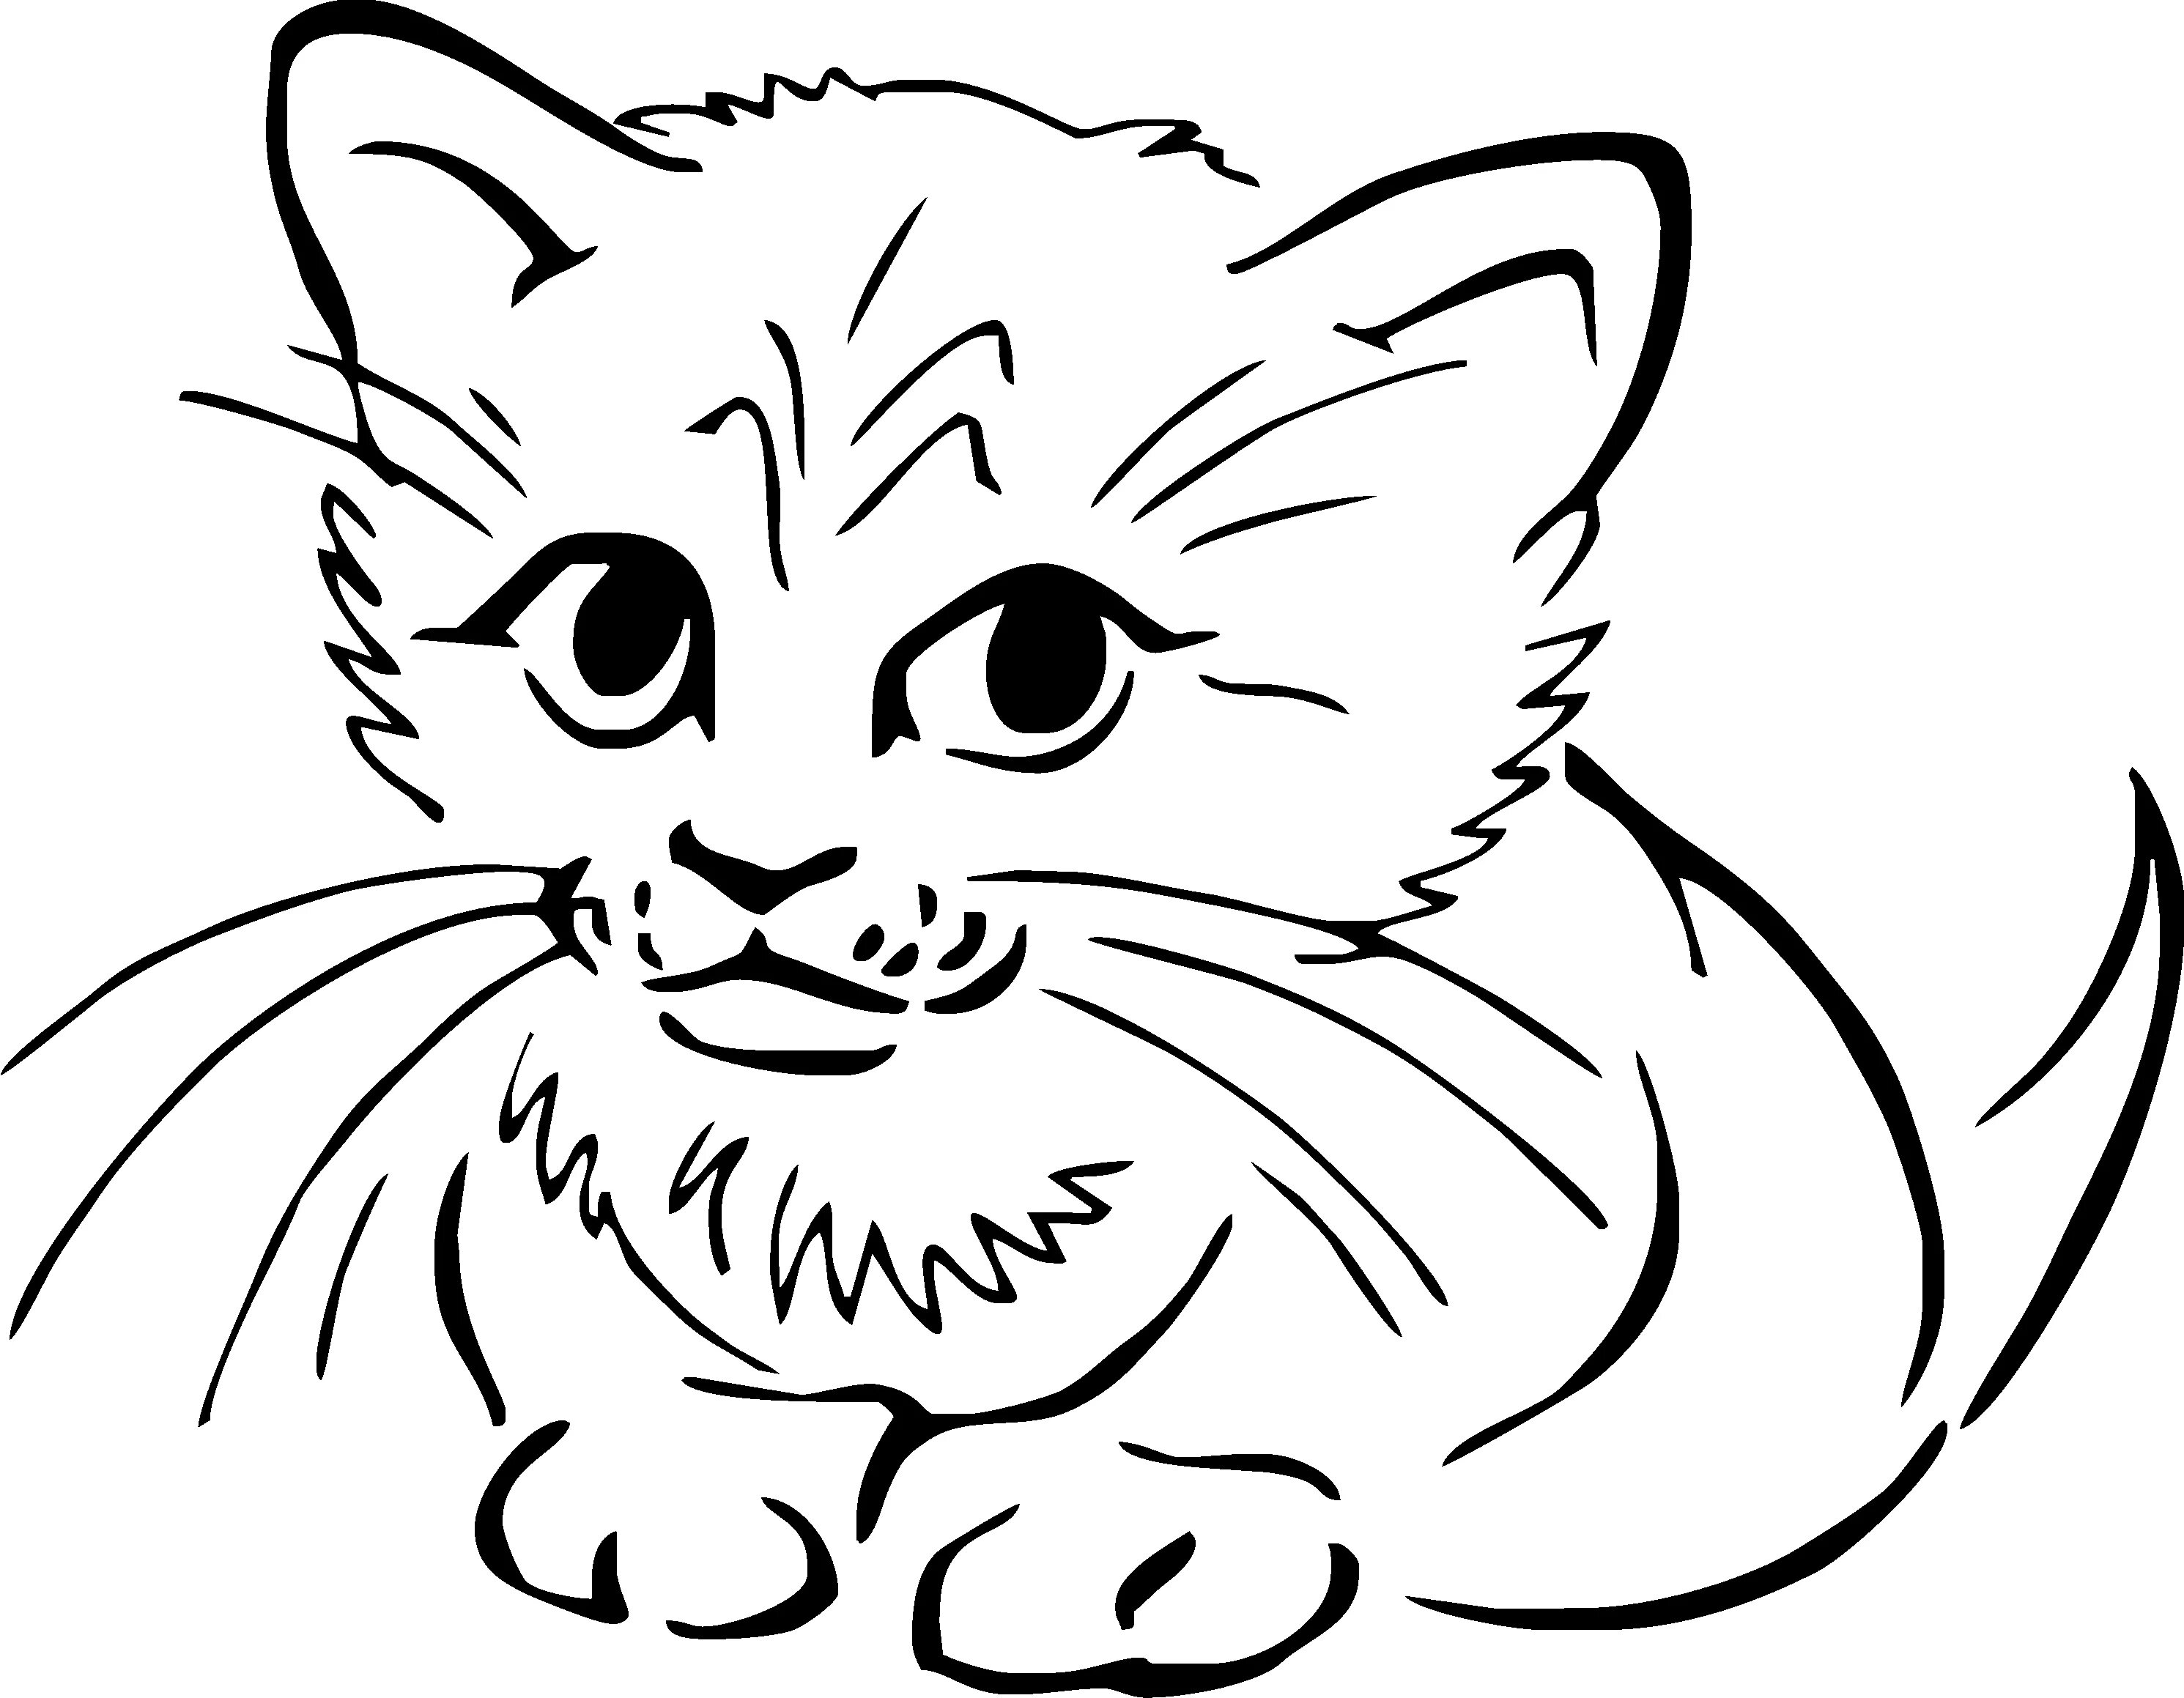 Coloring page happy white cat